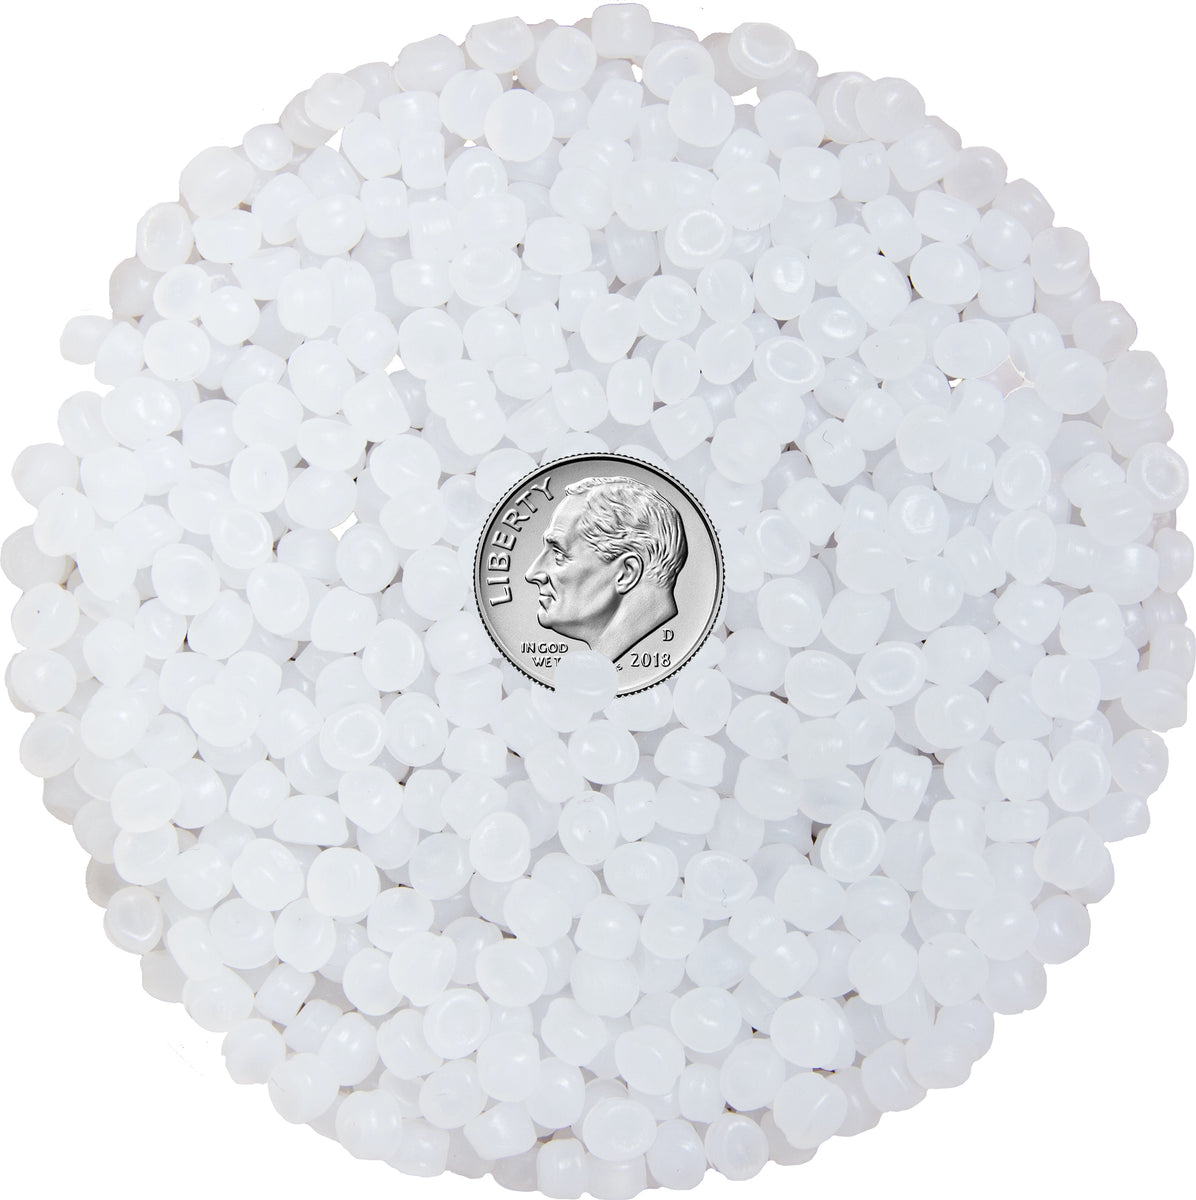 Extra Heavy Poly Pellets for Weighted Blankets | Weighted Stuffing Beads |  8.5 oz per cup